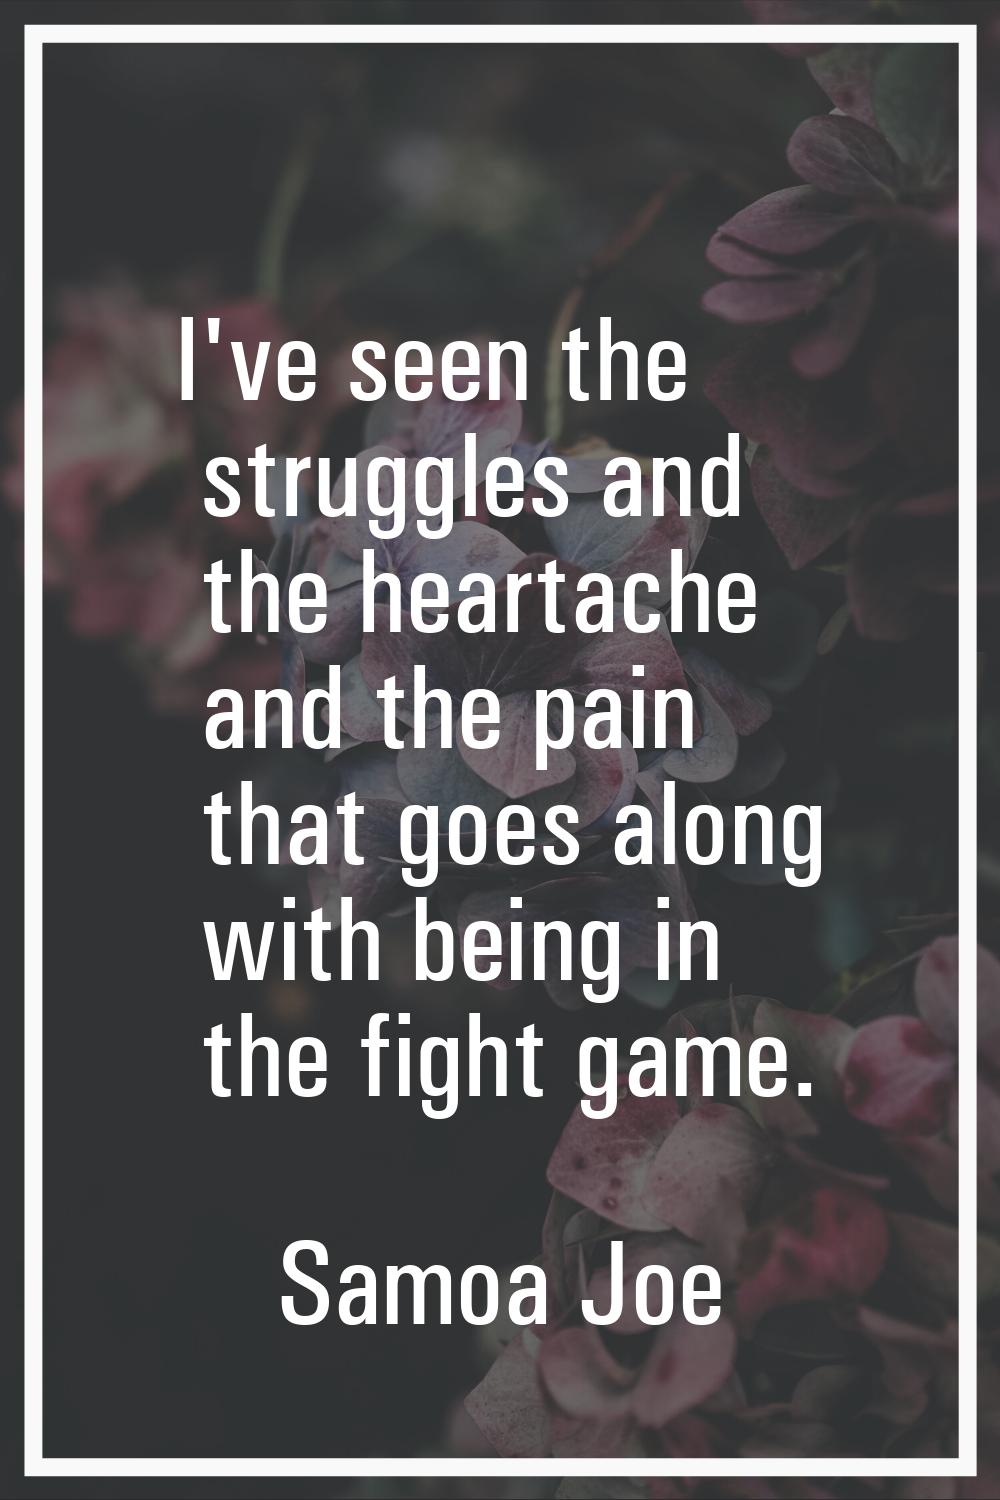 I've seen the struggles and the heartache and the pain that goes along with being in the fight game